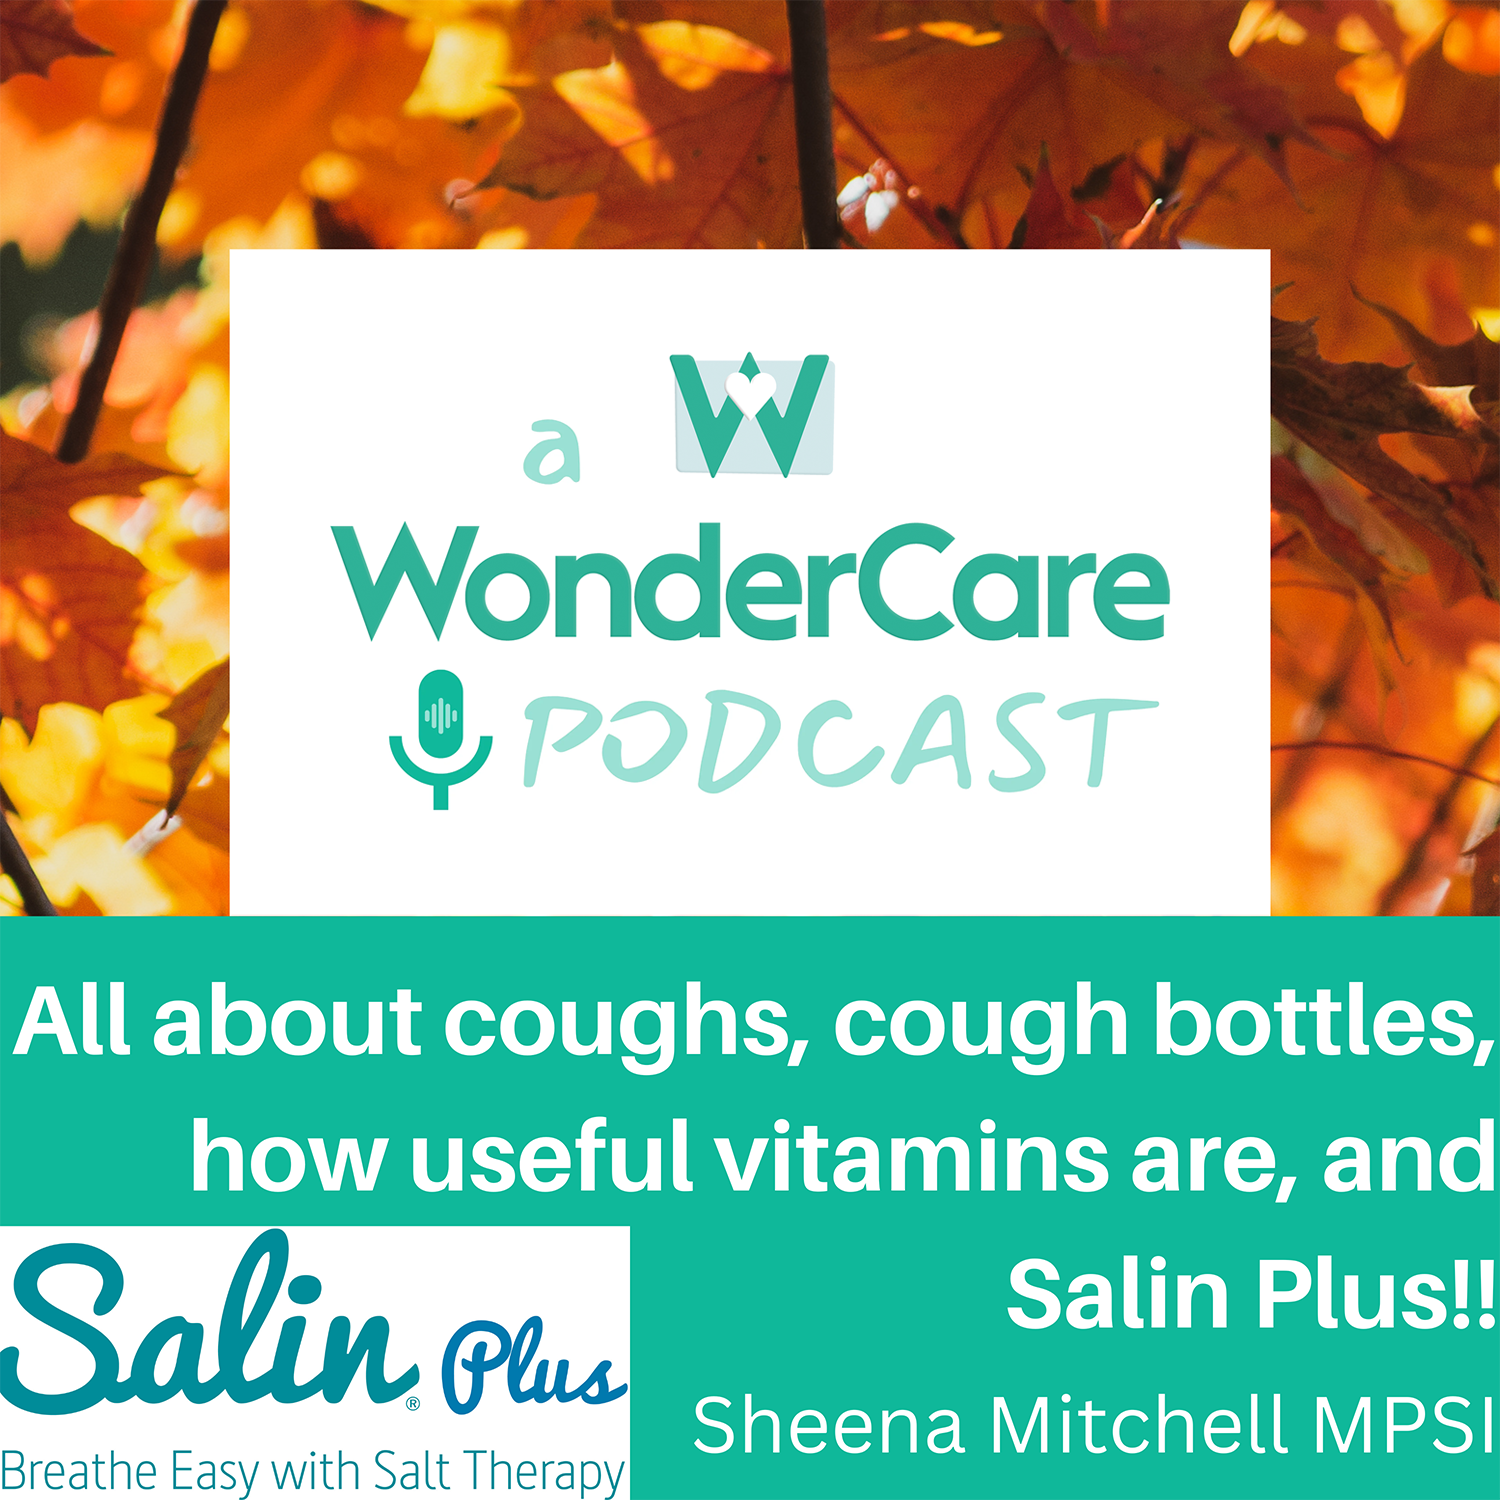 All about coughs, cough bottles, how useful vitamins are, and Salin Plus!